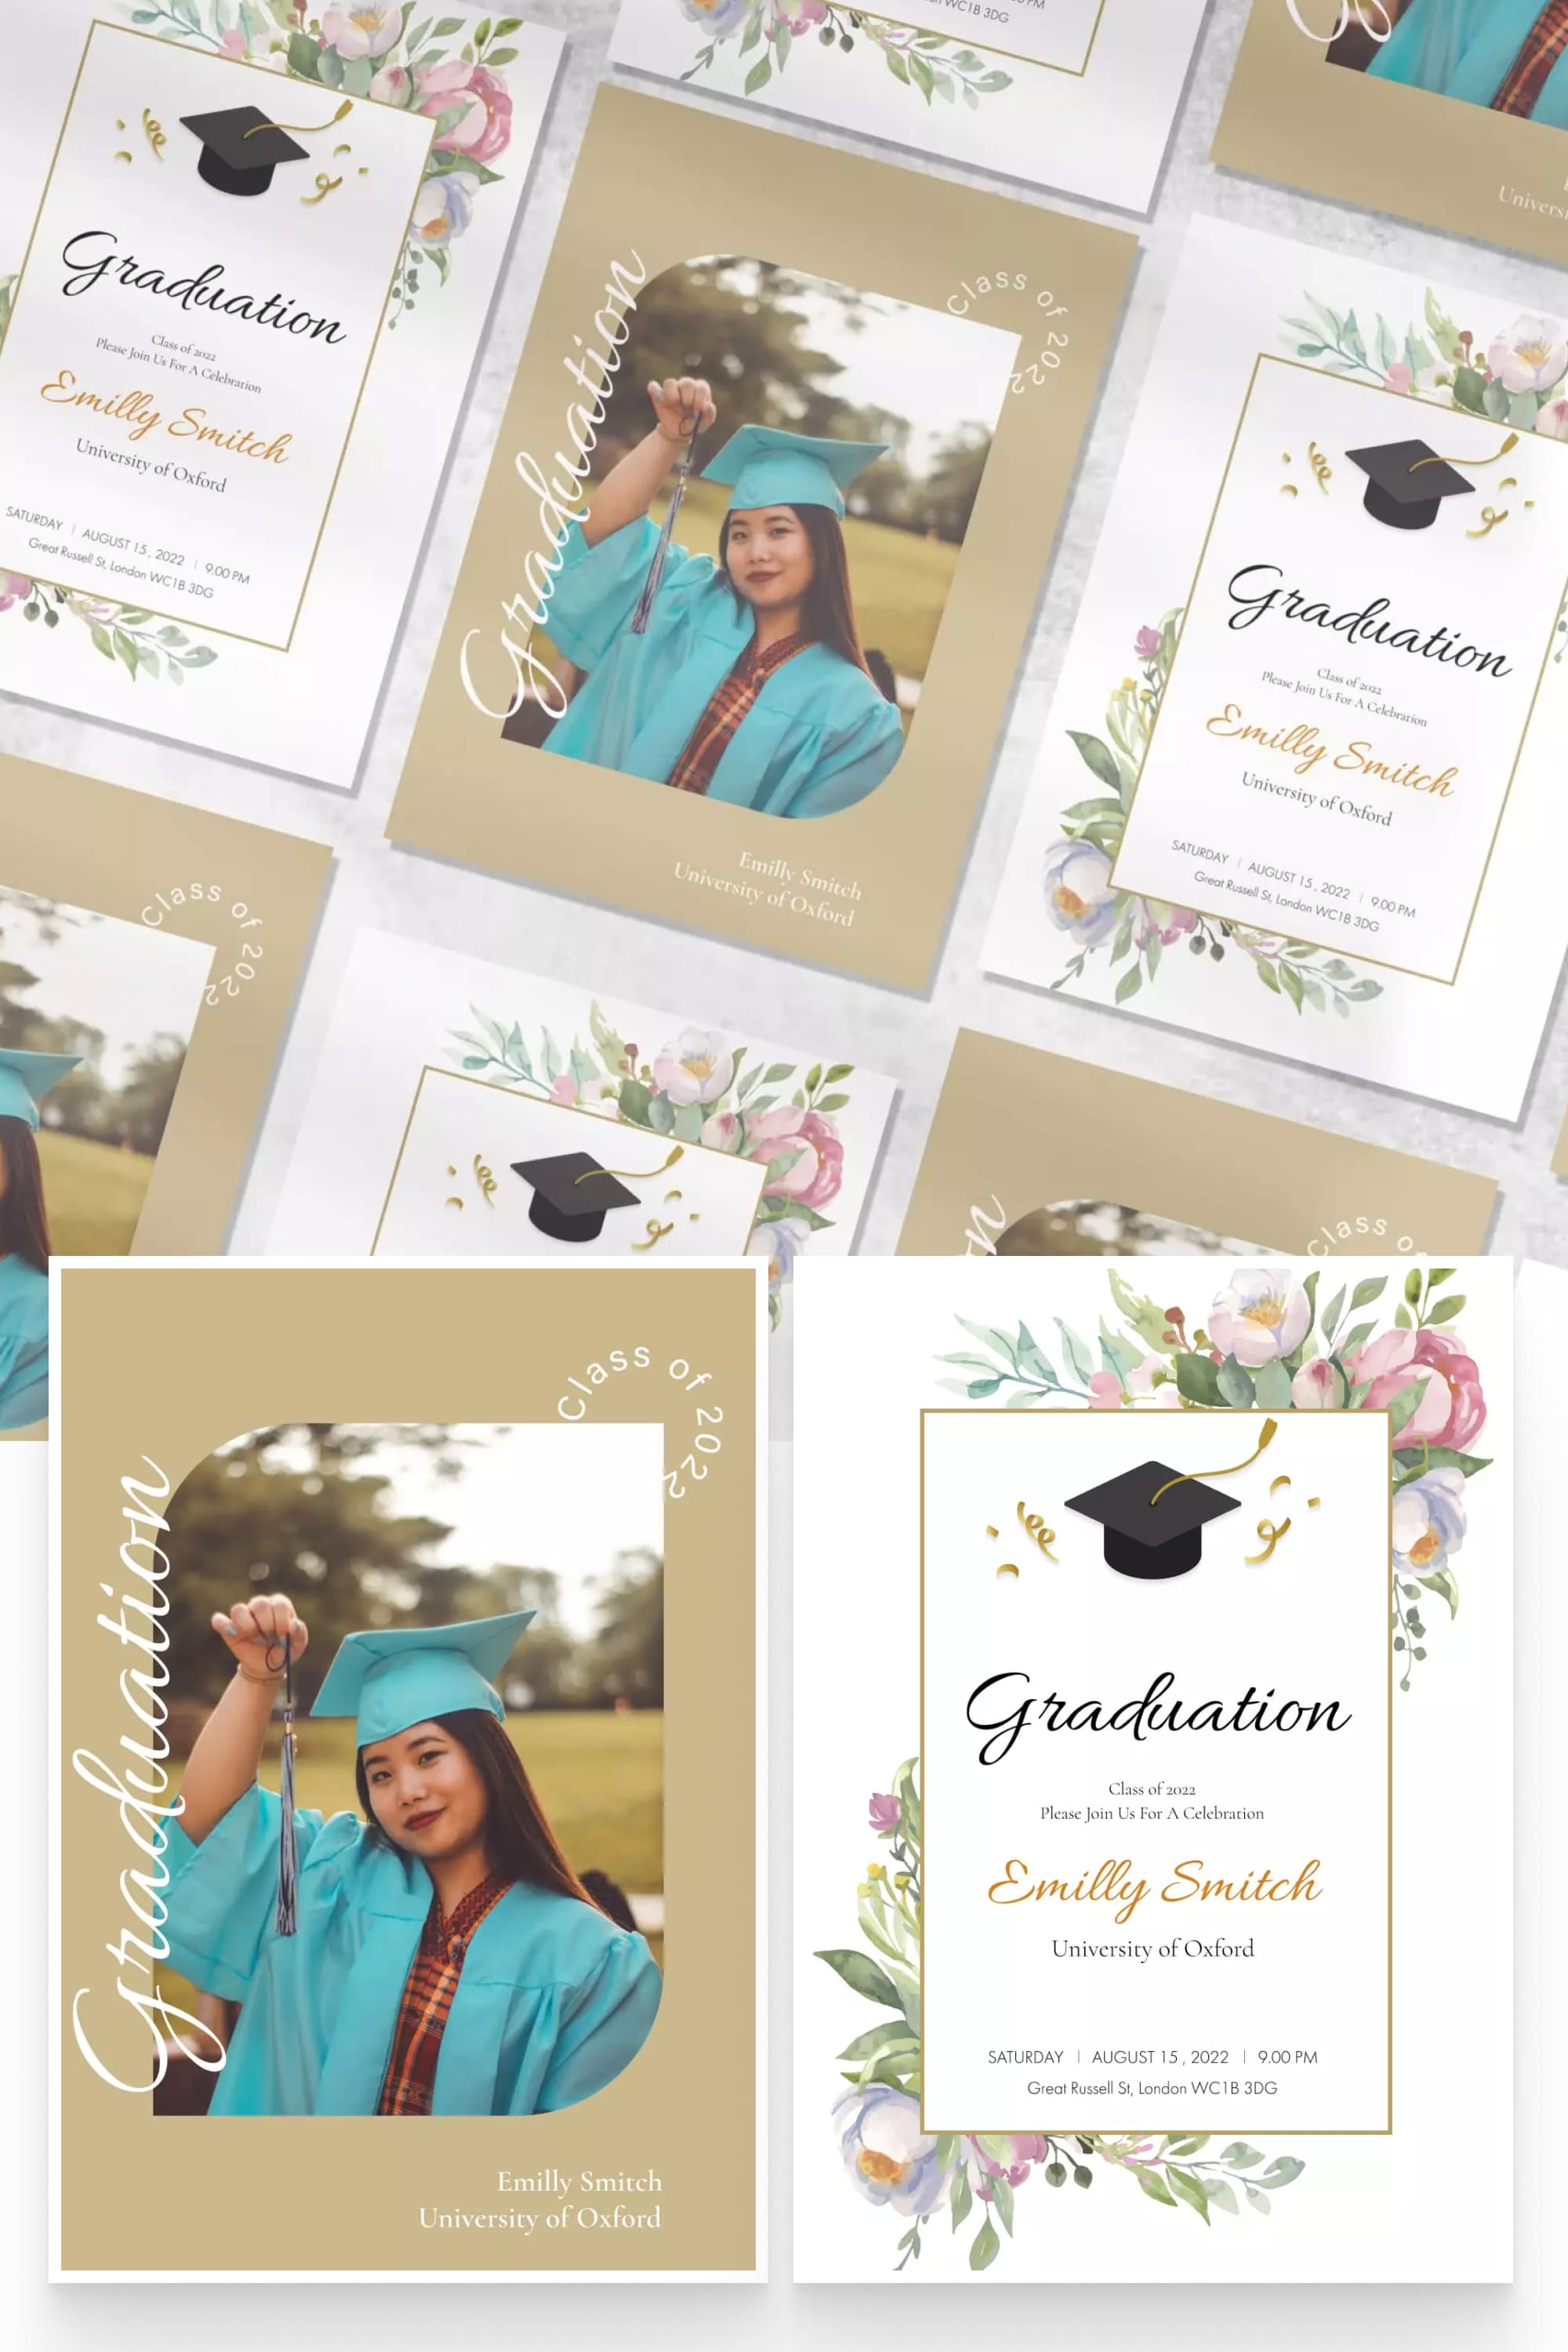 A collage of images of a graduation invitation with a photo of a student and text decorated with flowers.